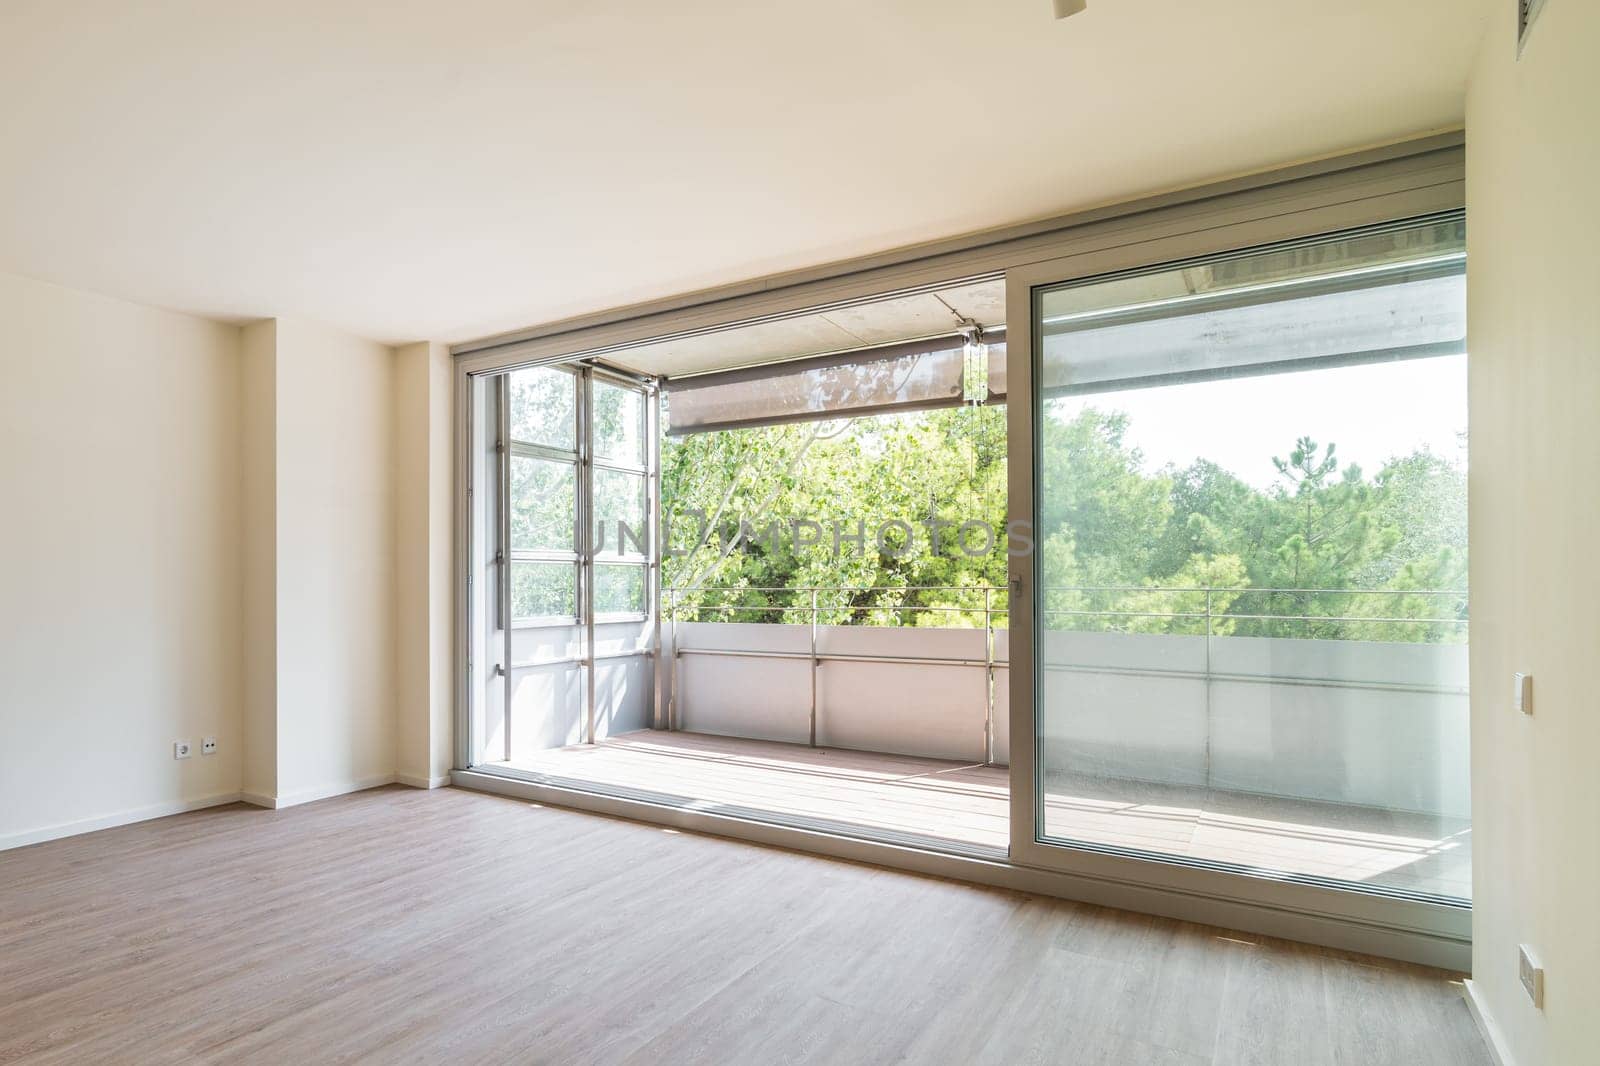 Panoramic large window to balcony from empty bedroom. Spacious place for sleep with nature view after designer renovation without furniture